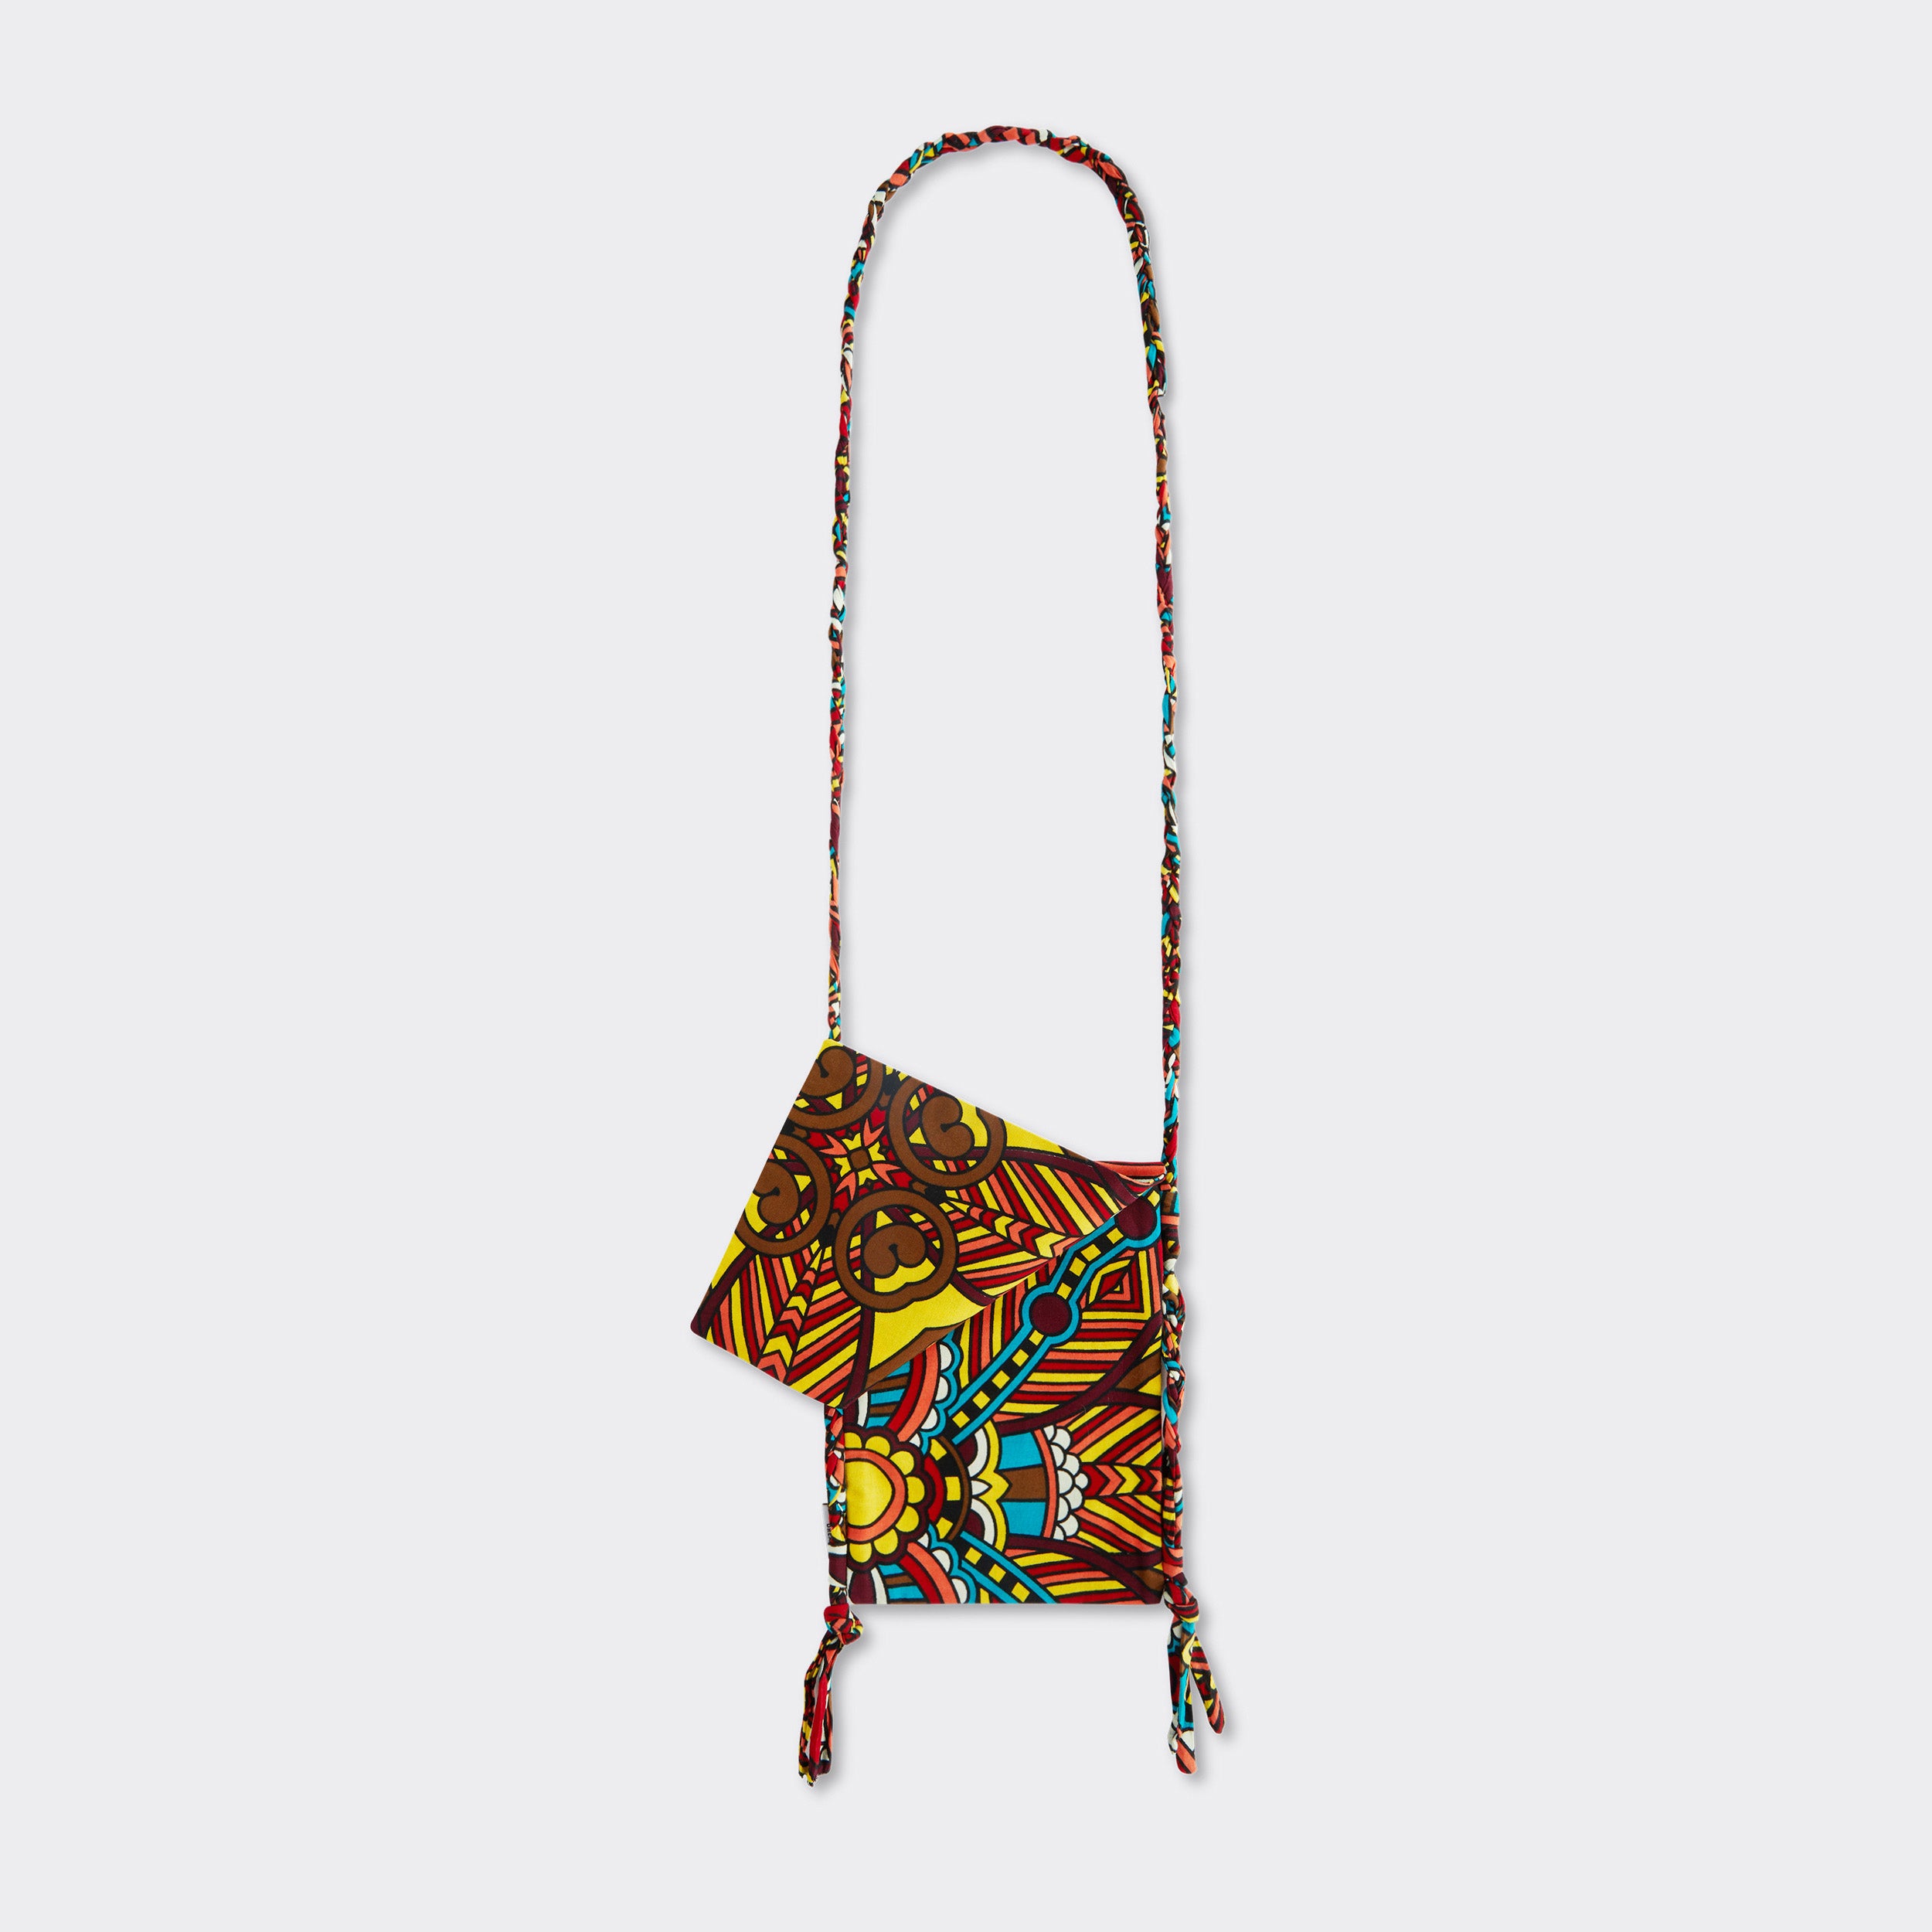 Still life: Crossbody Mini Bag in Wax African Dream with colors red, blue, and yellow.